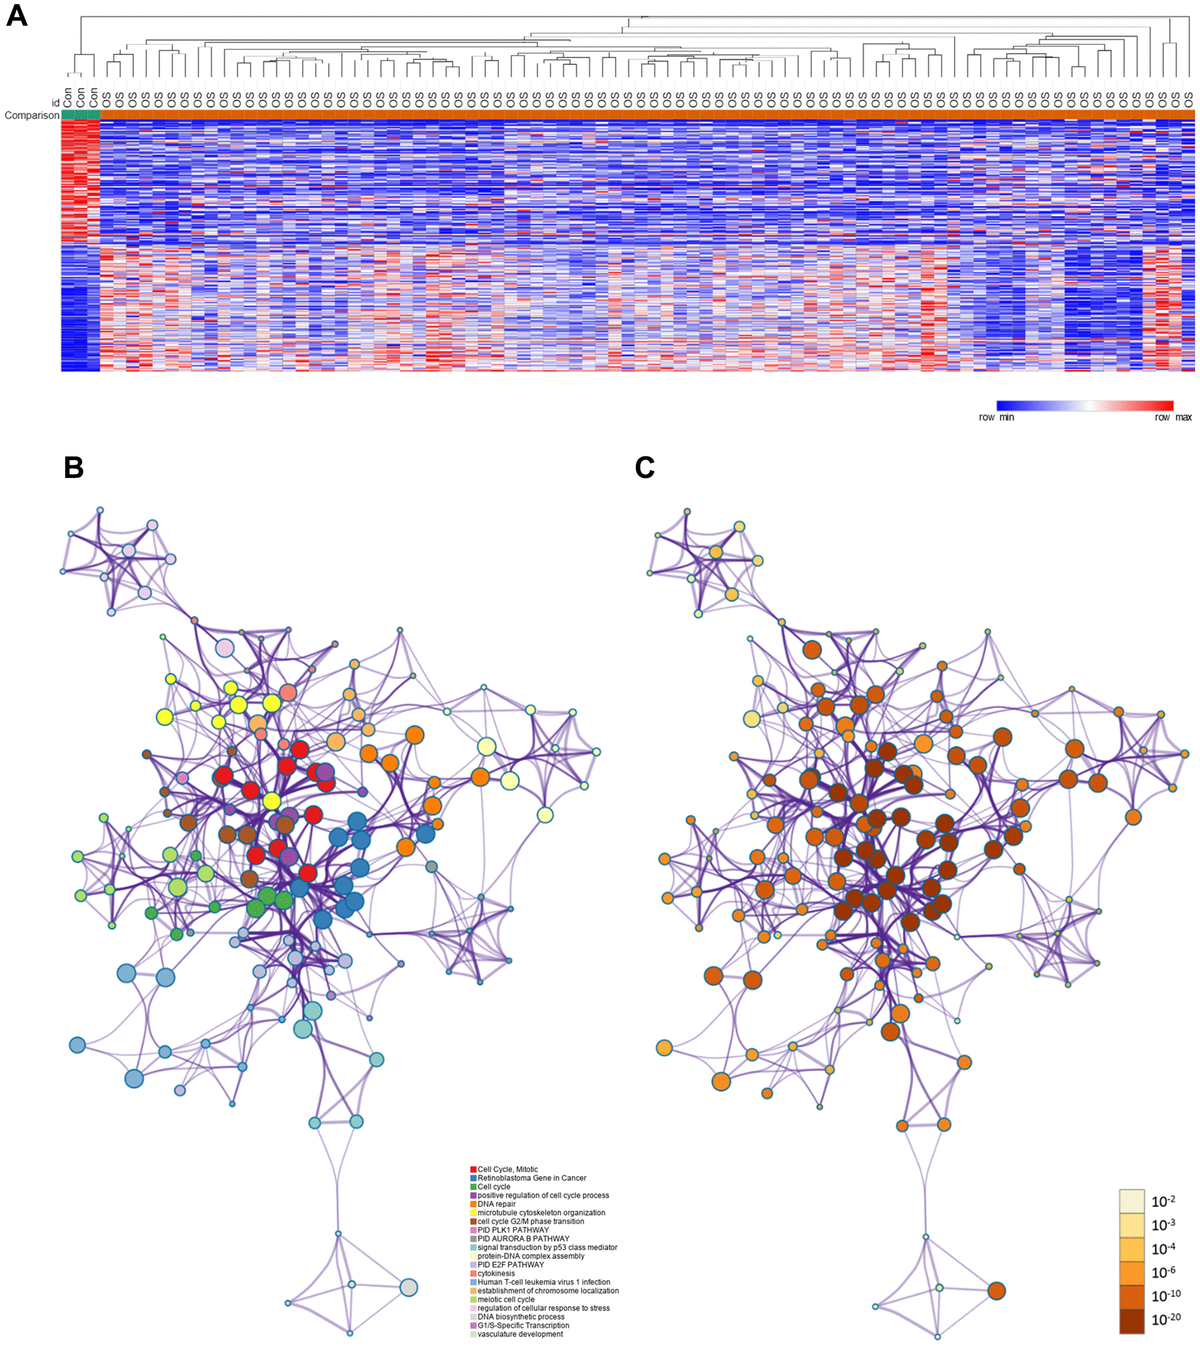 DEGs between osteosarcoma and normal tissues. (A) Heat map of the DEGs in GSE42352. (B) DEGs colored by cluster ID. DEGs in the same cluster ID nodes are closely related to each other. (C) DEGs colored by P-value. Terms with more significant P-values contain more genes.